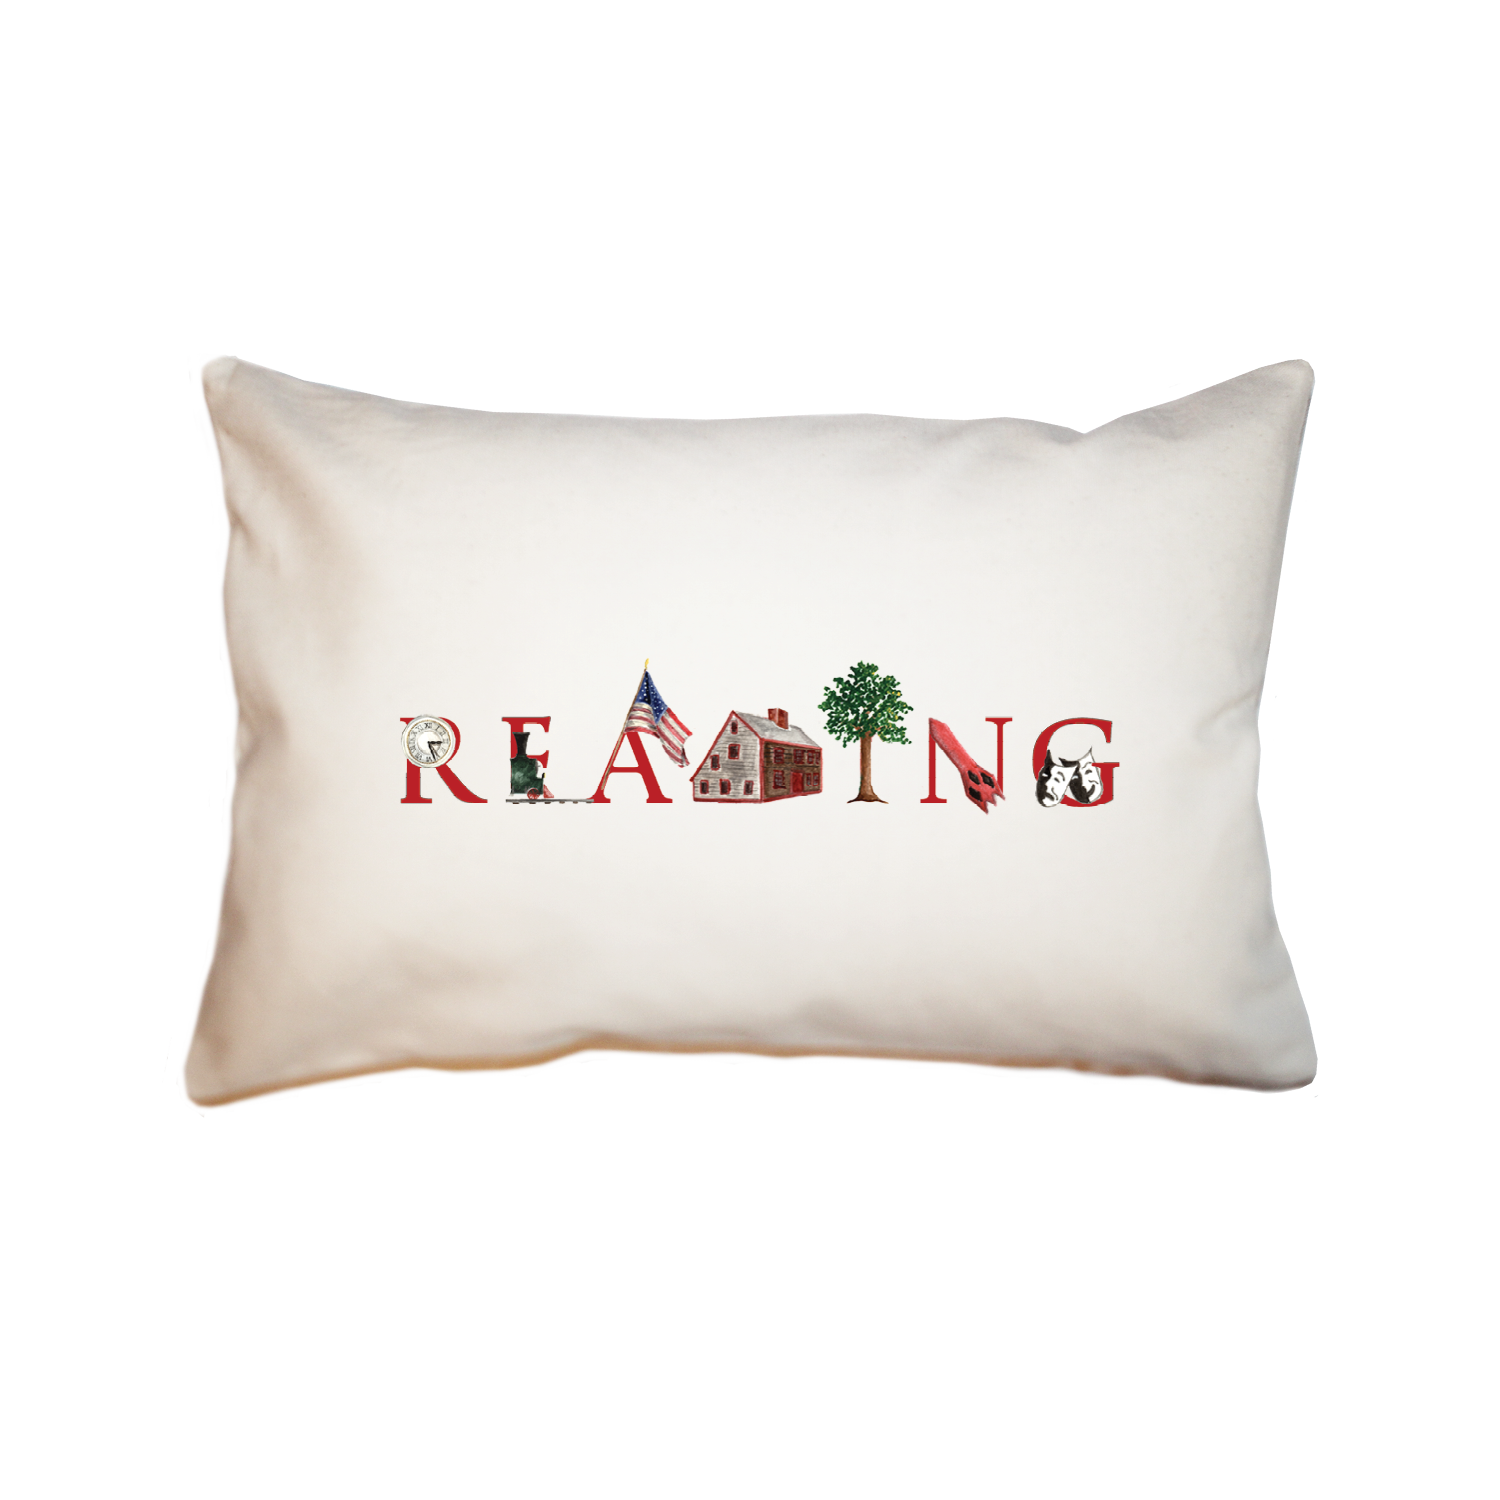 Reading large rectangle pillow